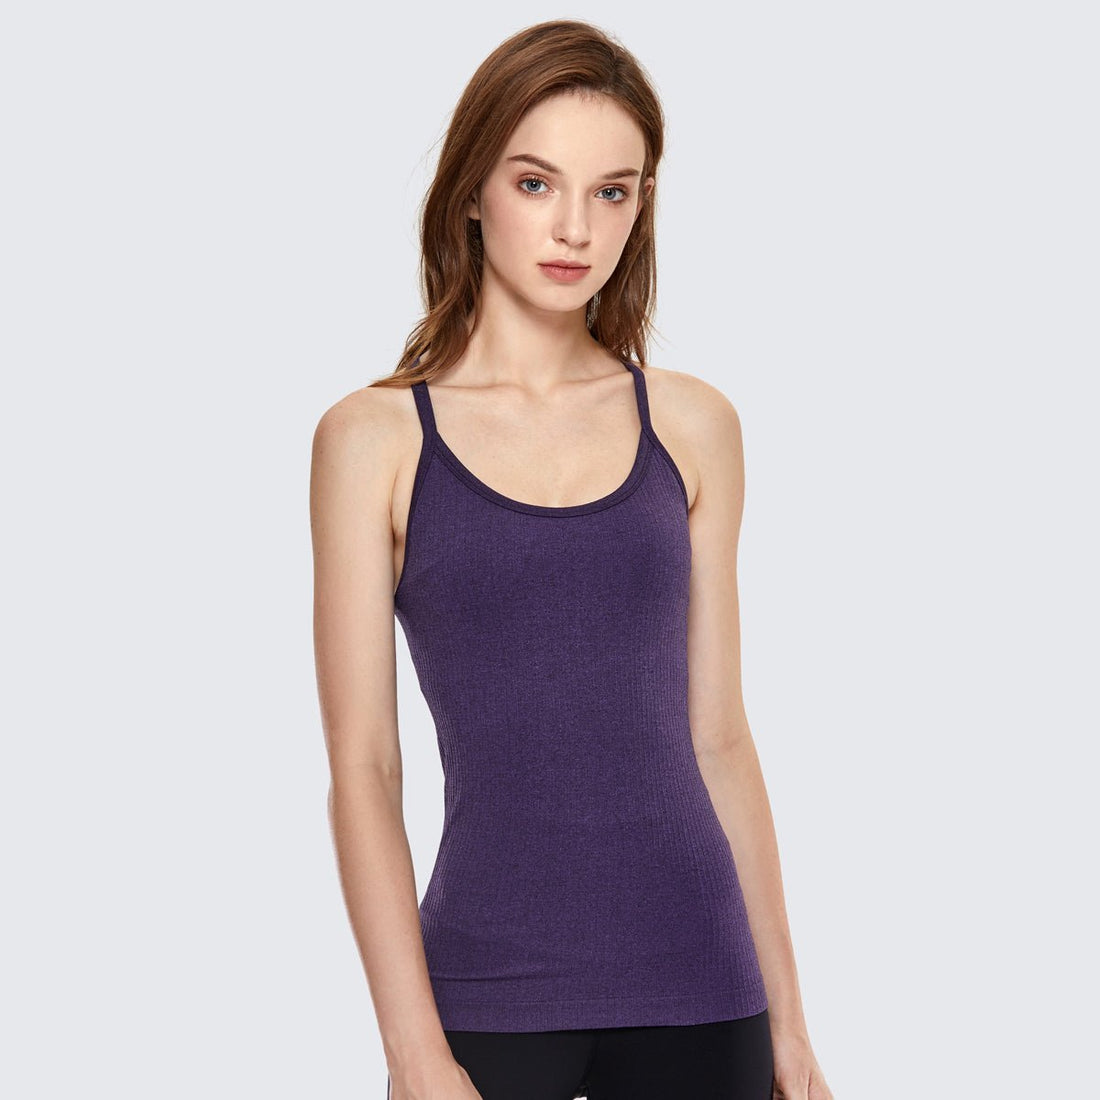 Built in Bra Seamless Athletic Camisole Purple Workout Tank Top - 0cm